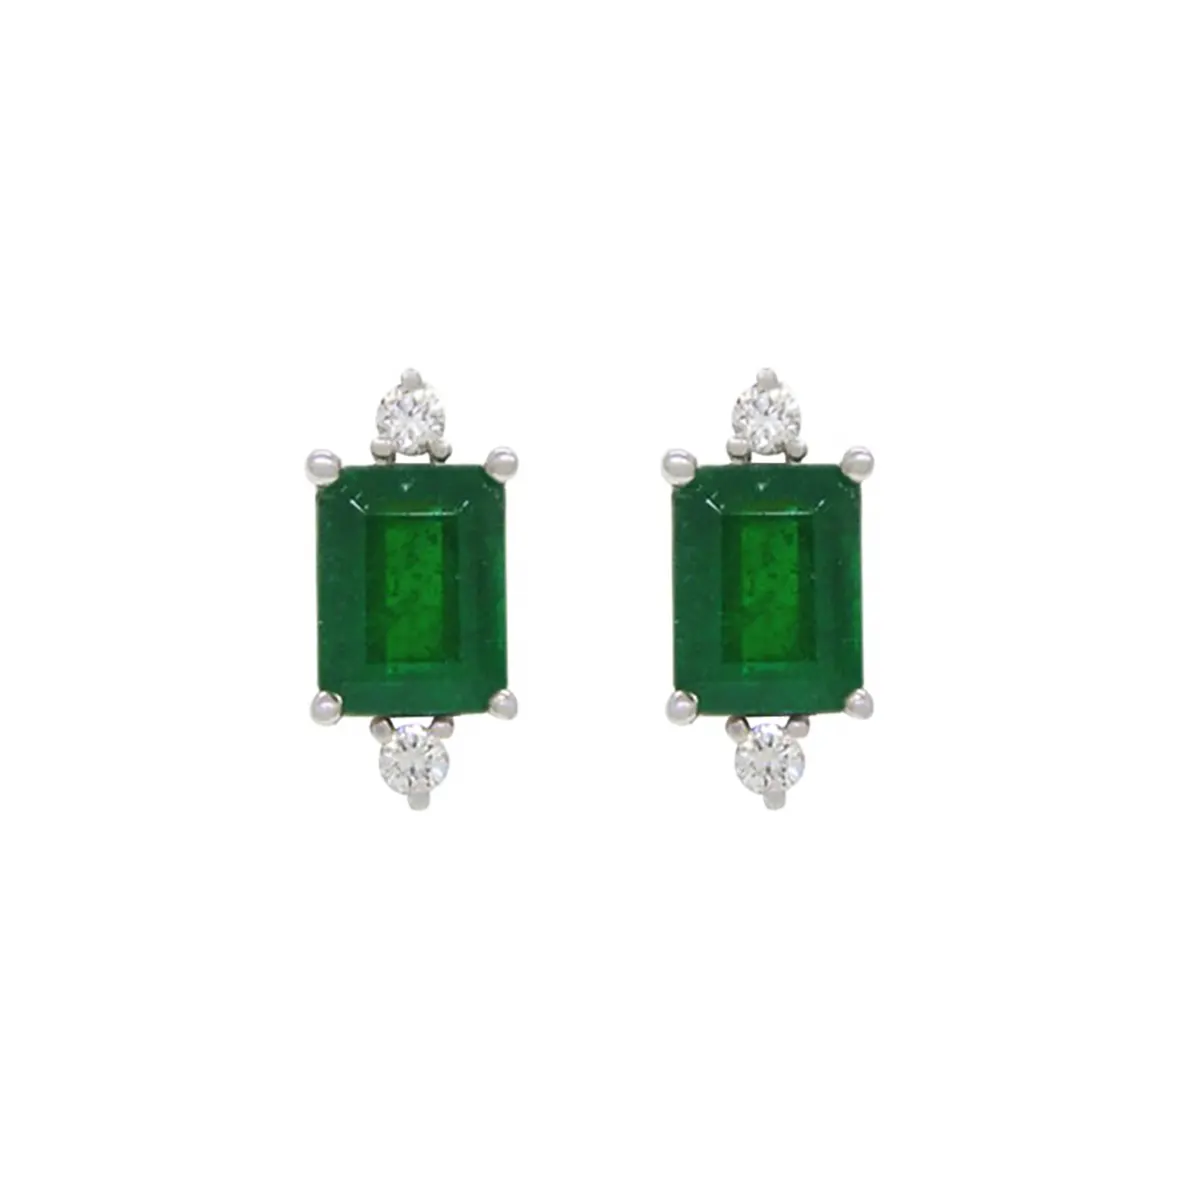 emerald-cut-natural-emeralds-set-in-18k-white-gold-stud-earrings-with-round-diamonds